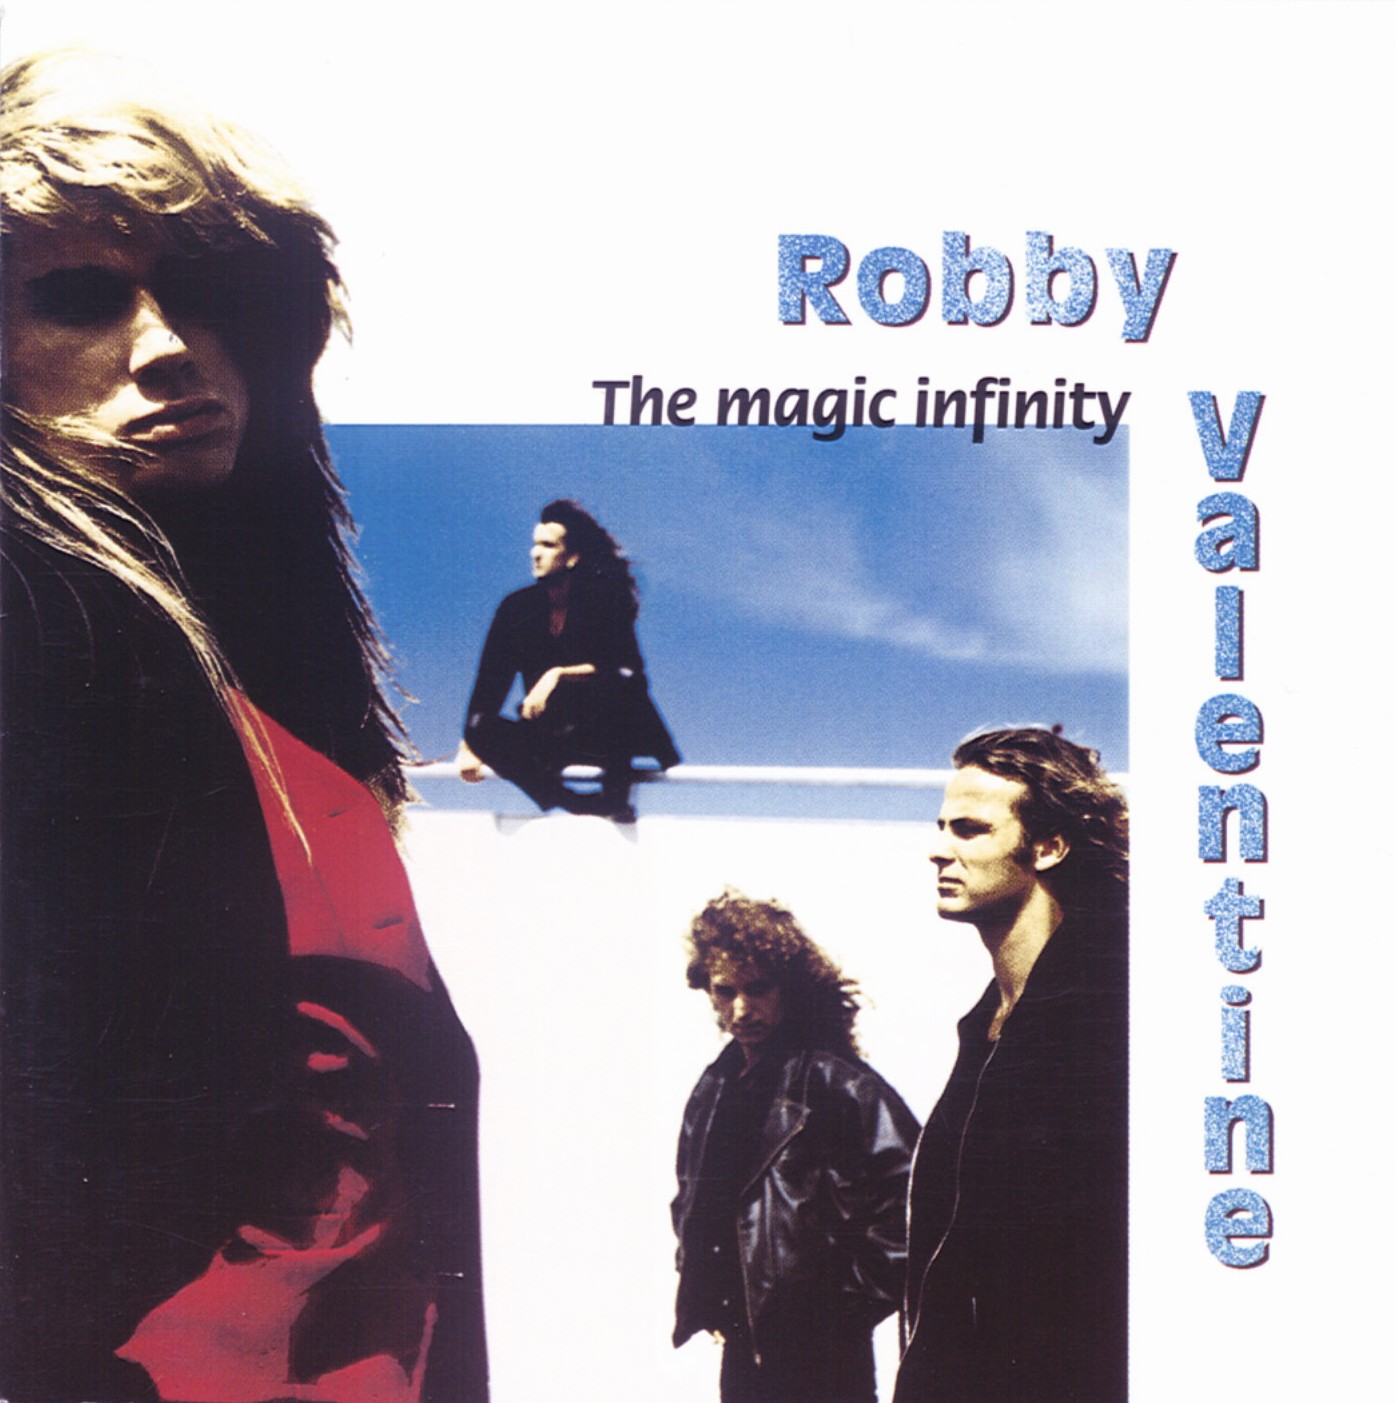 [Robby+Valentine+-+The+Magic+Infinity++_+front.jpg]